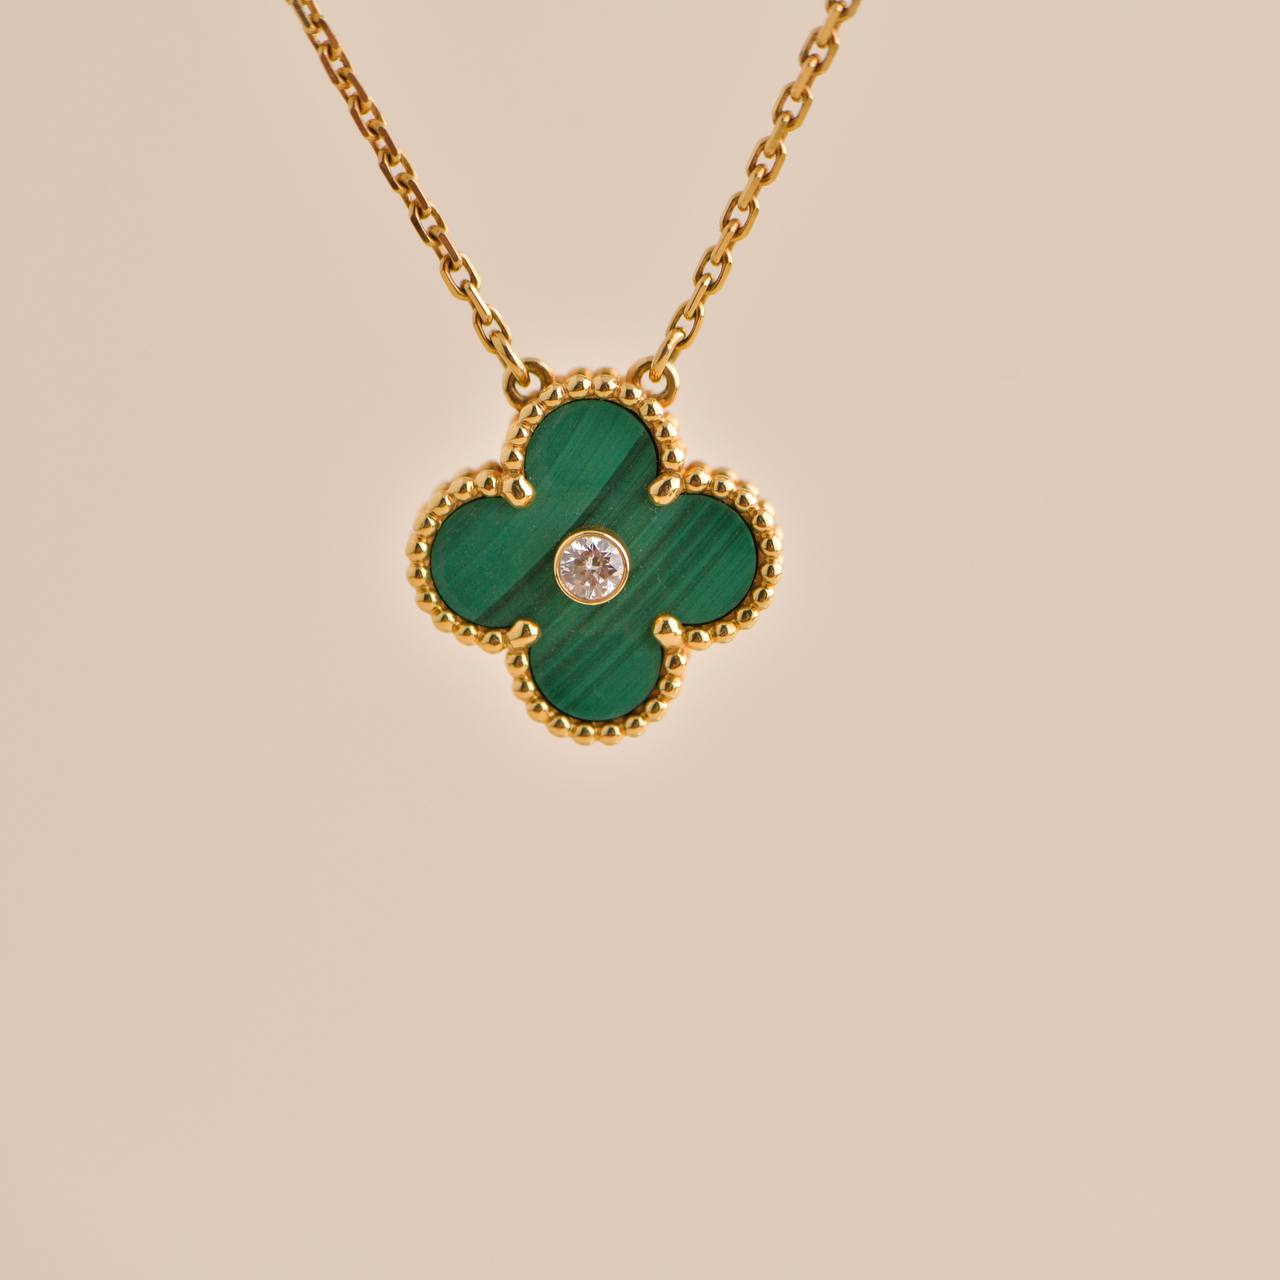 Van Cleef and Arpels' Alhambra line makes luck look lovely